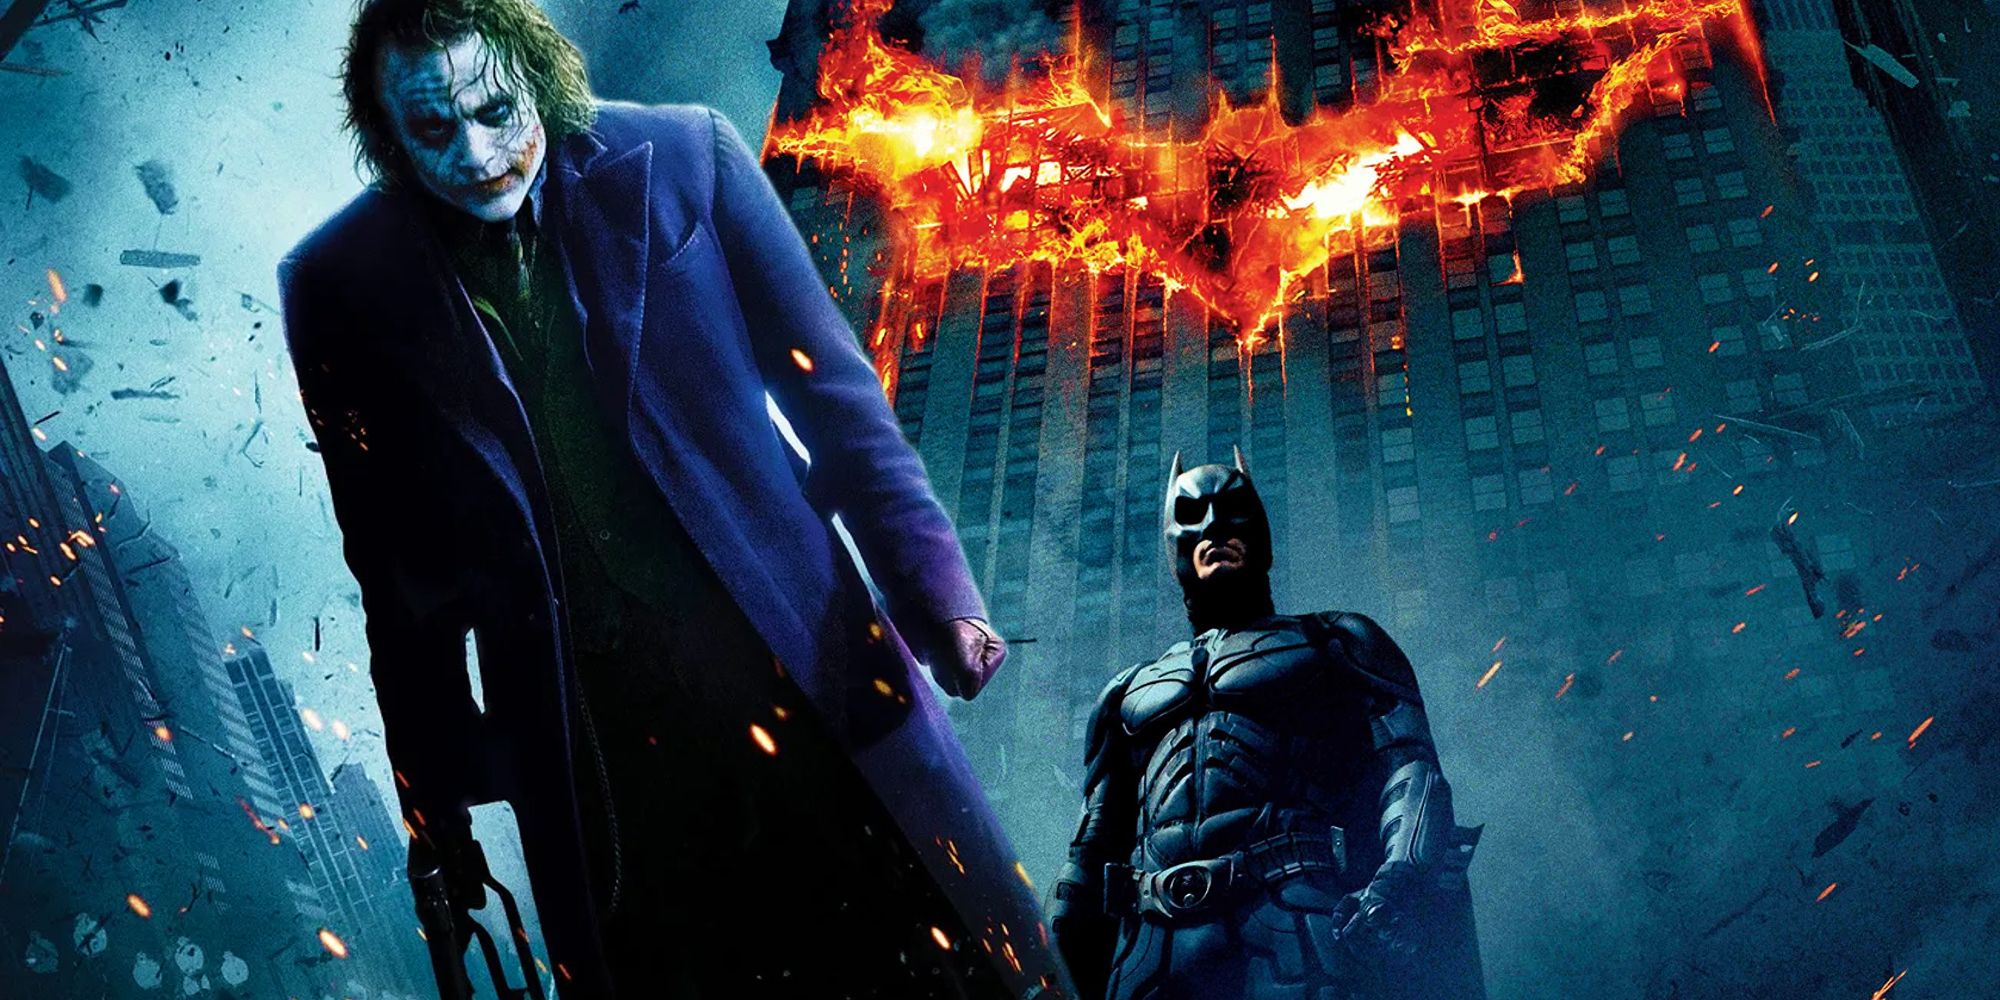 The Dark Knight's poster and the character poster for Joker